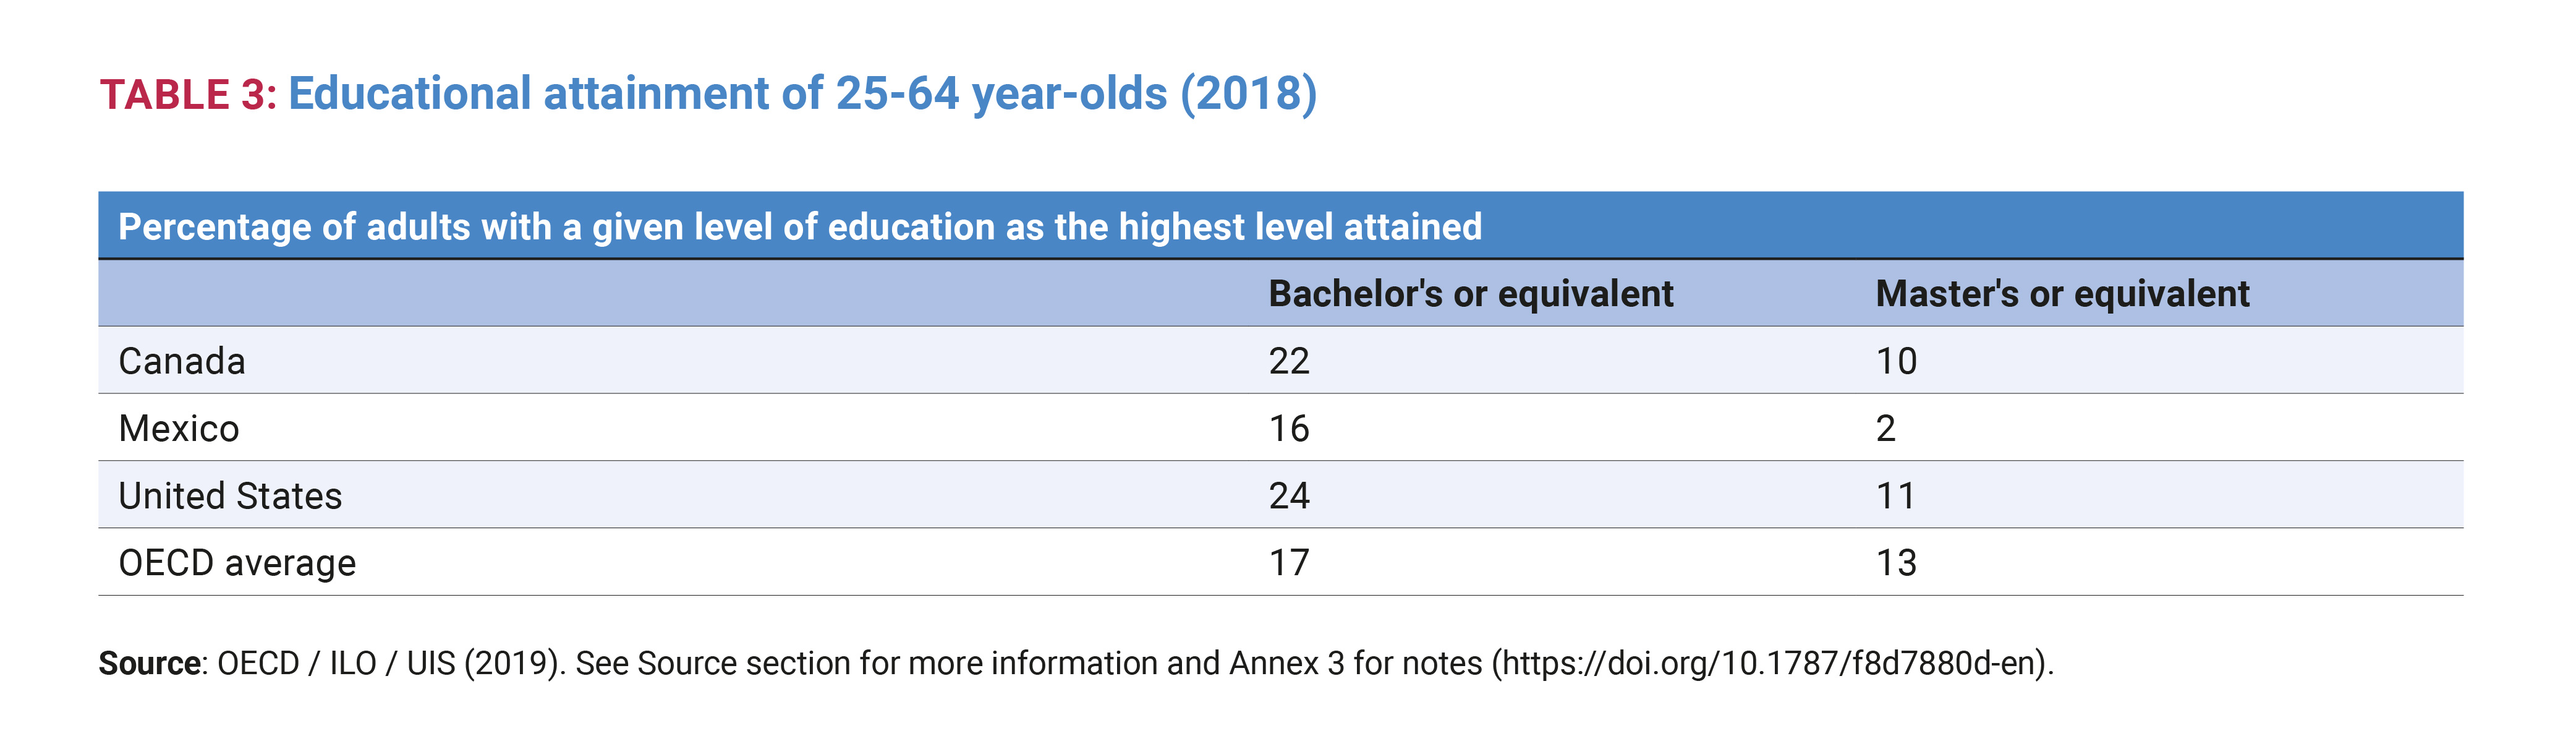 Educational attainment of 25-64 year-olds (2018)